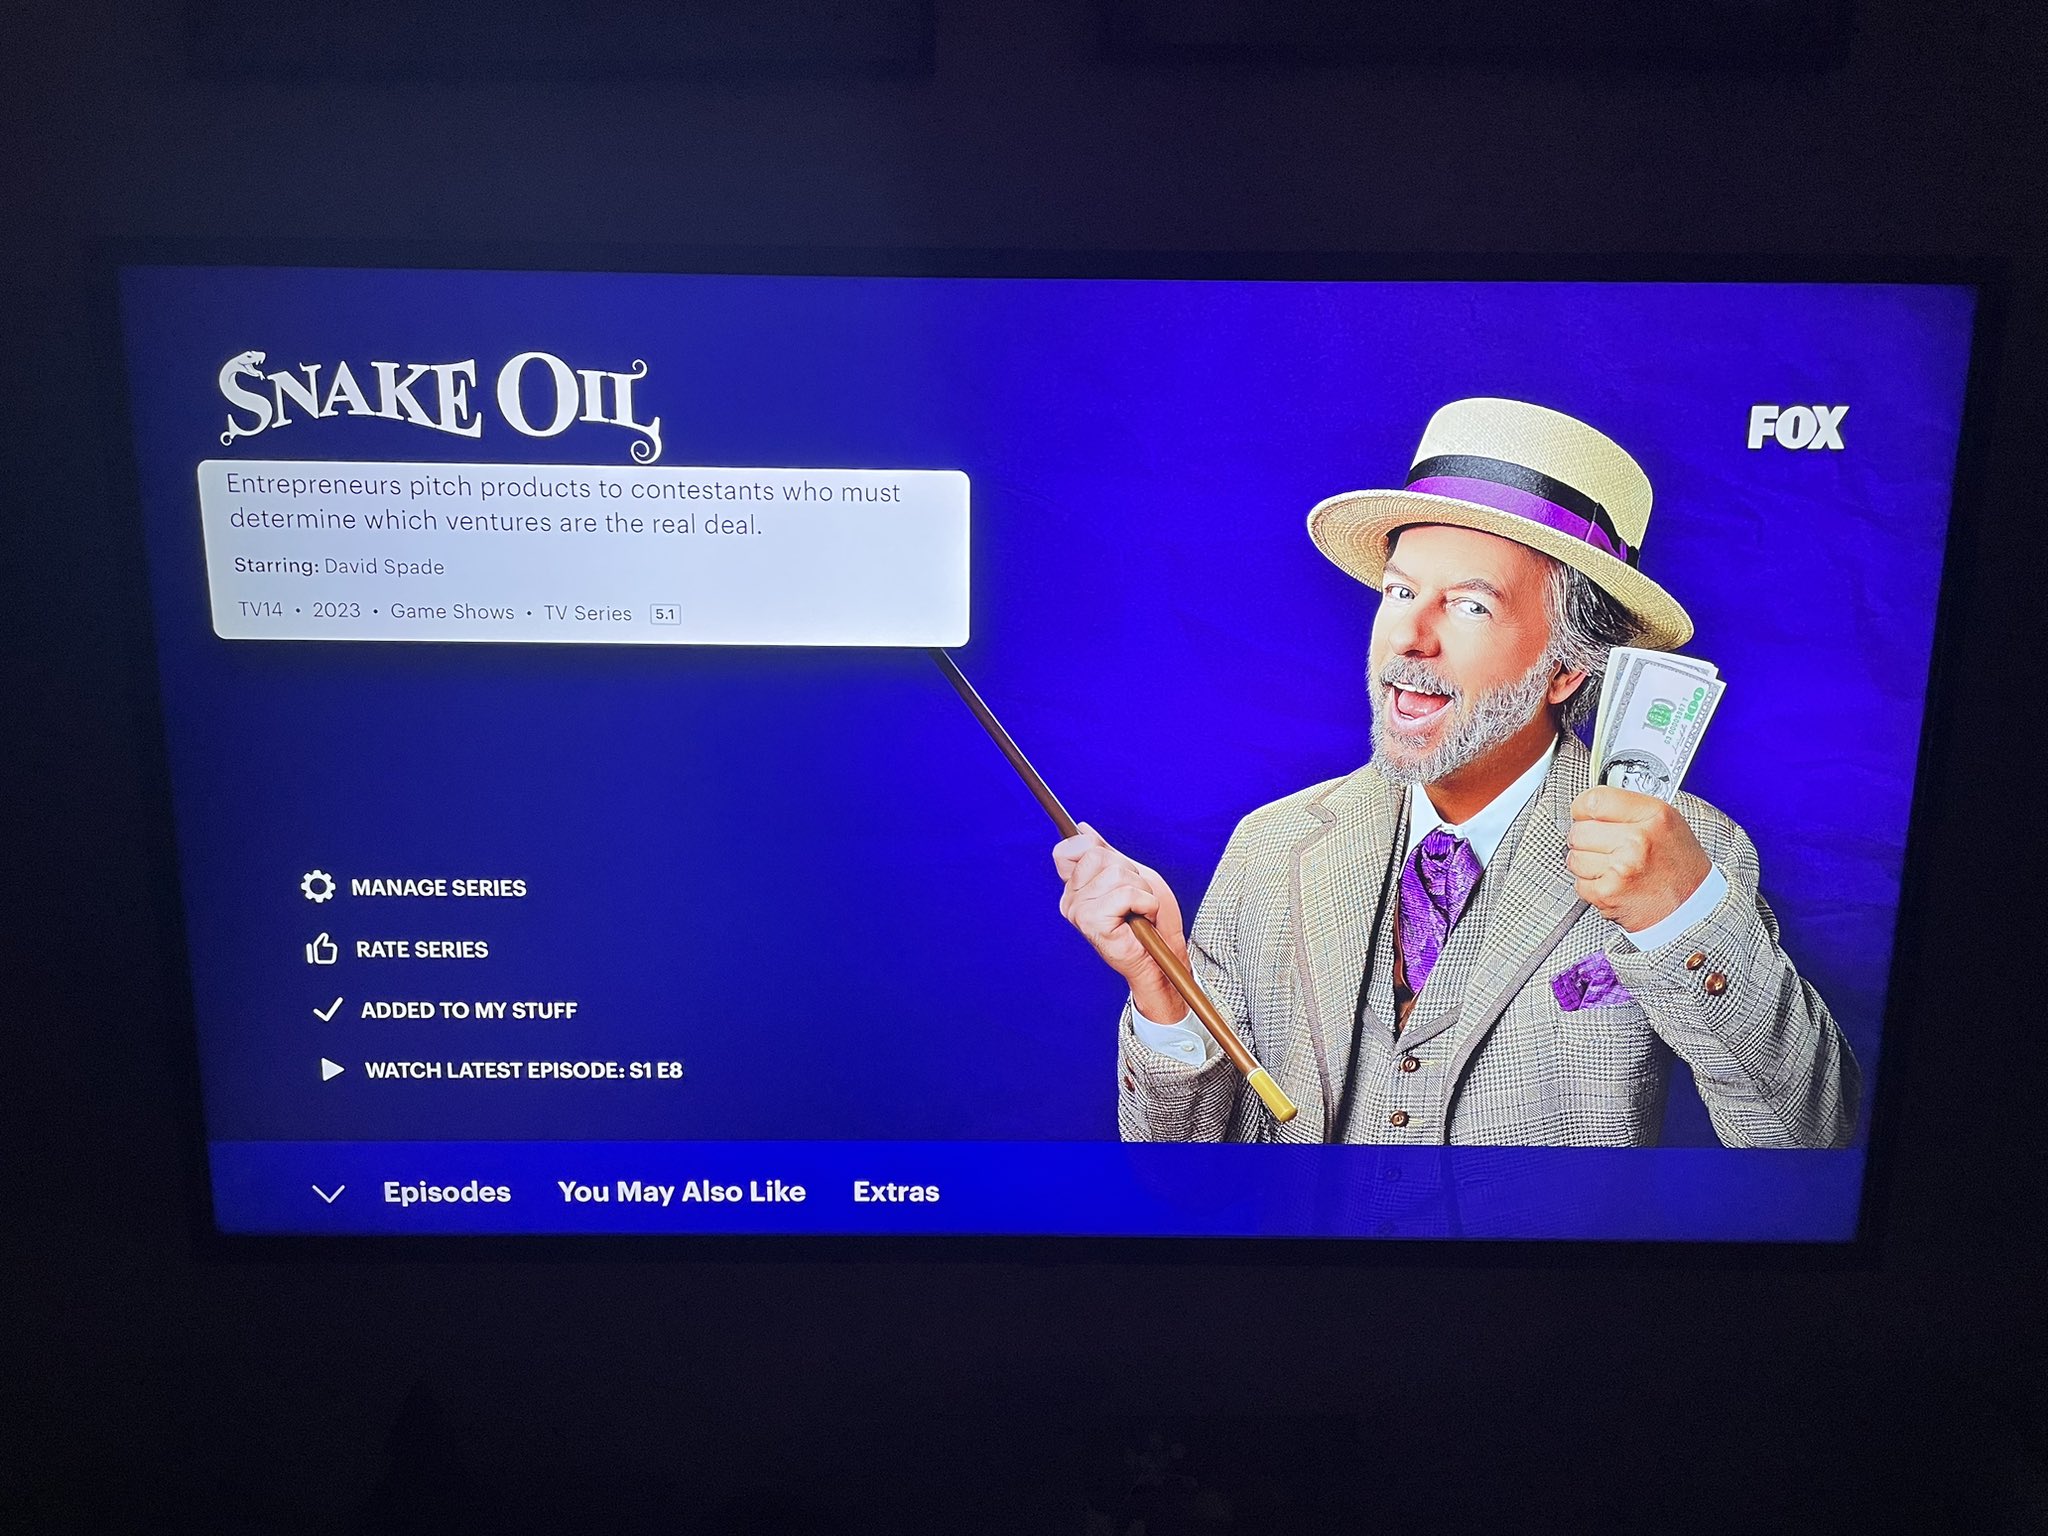 FOX's upcoming game show, 'Snake Oil,' looking for contestants